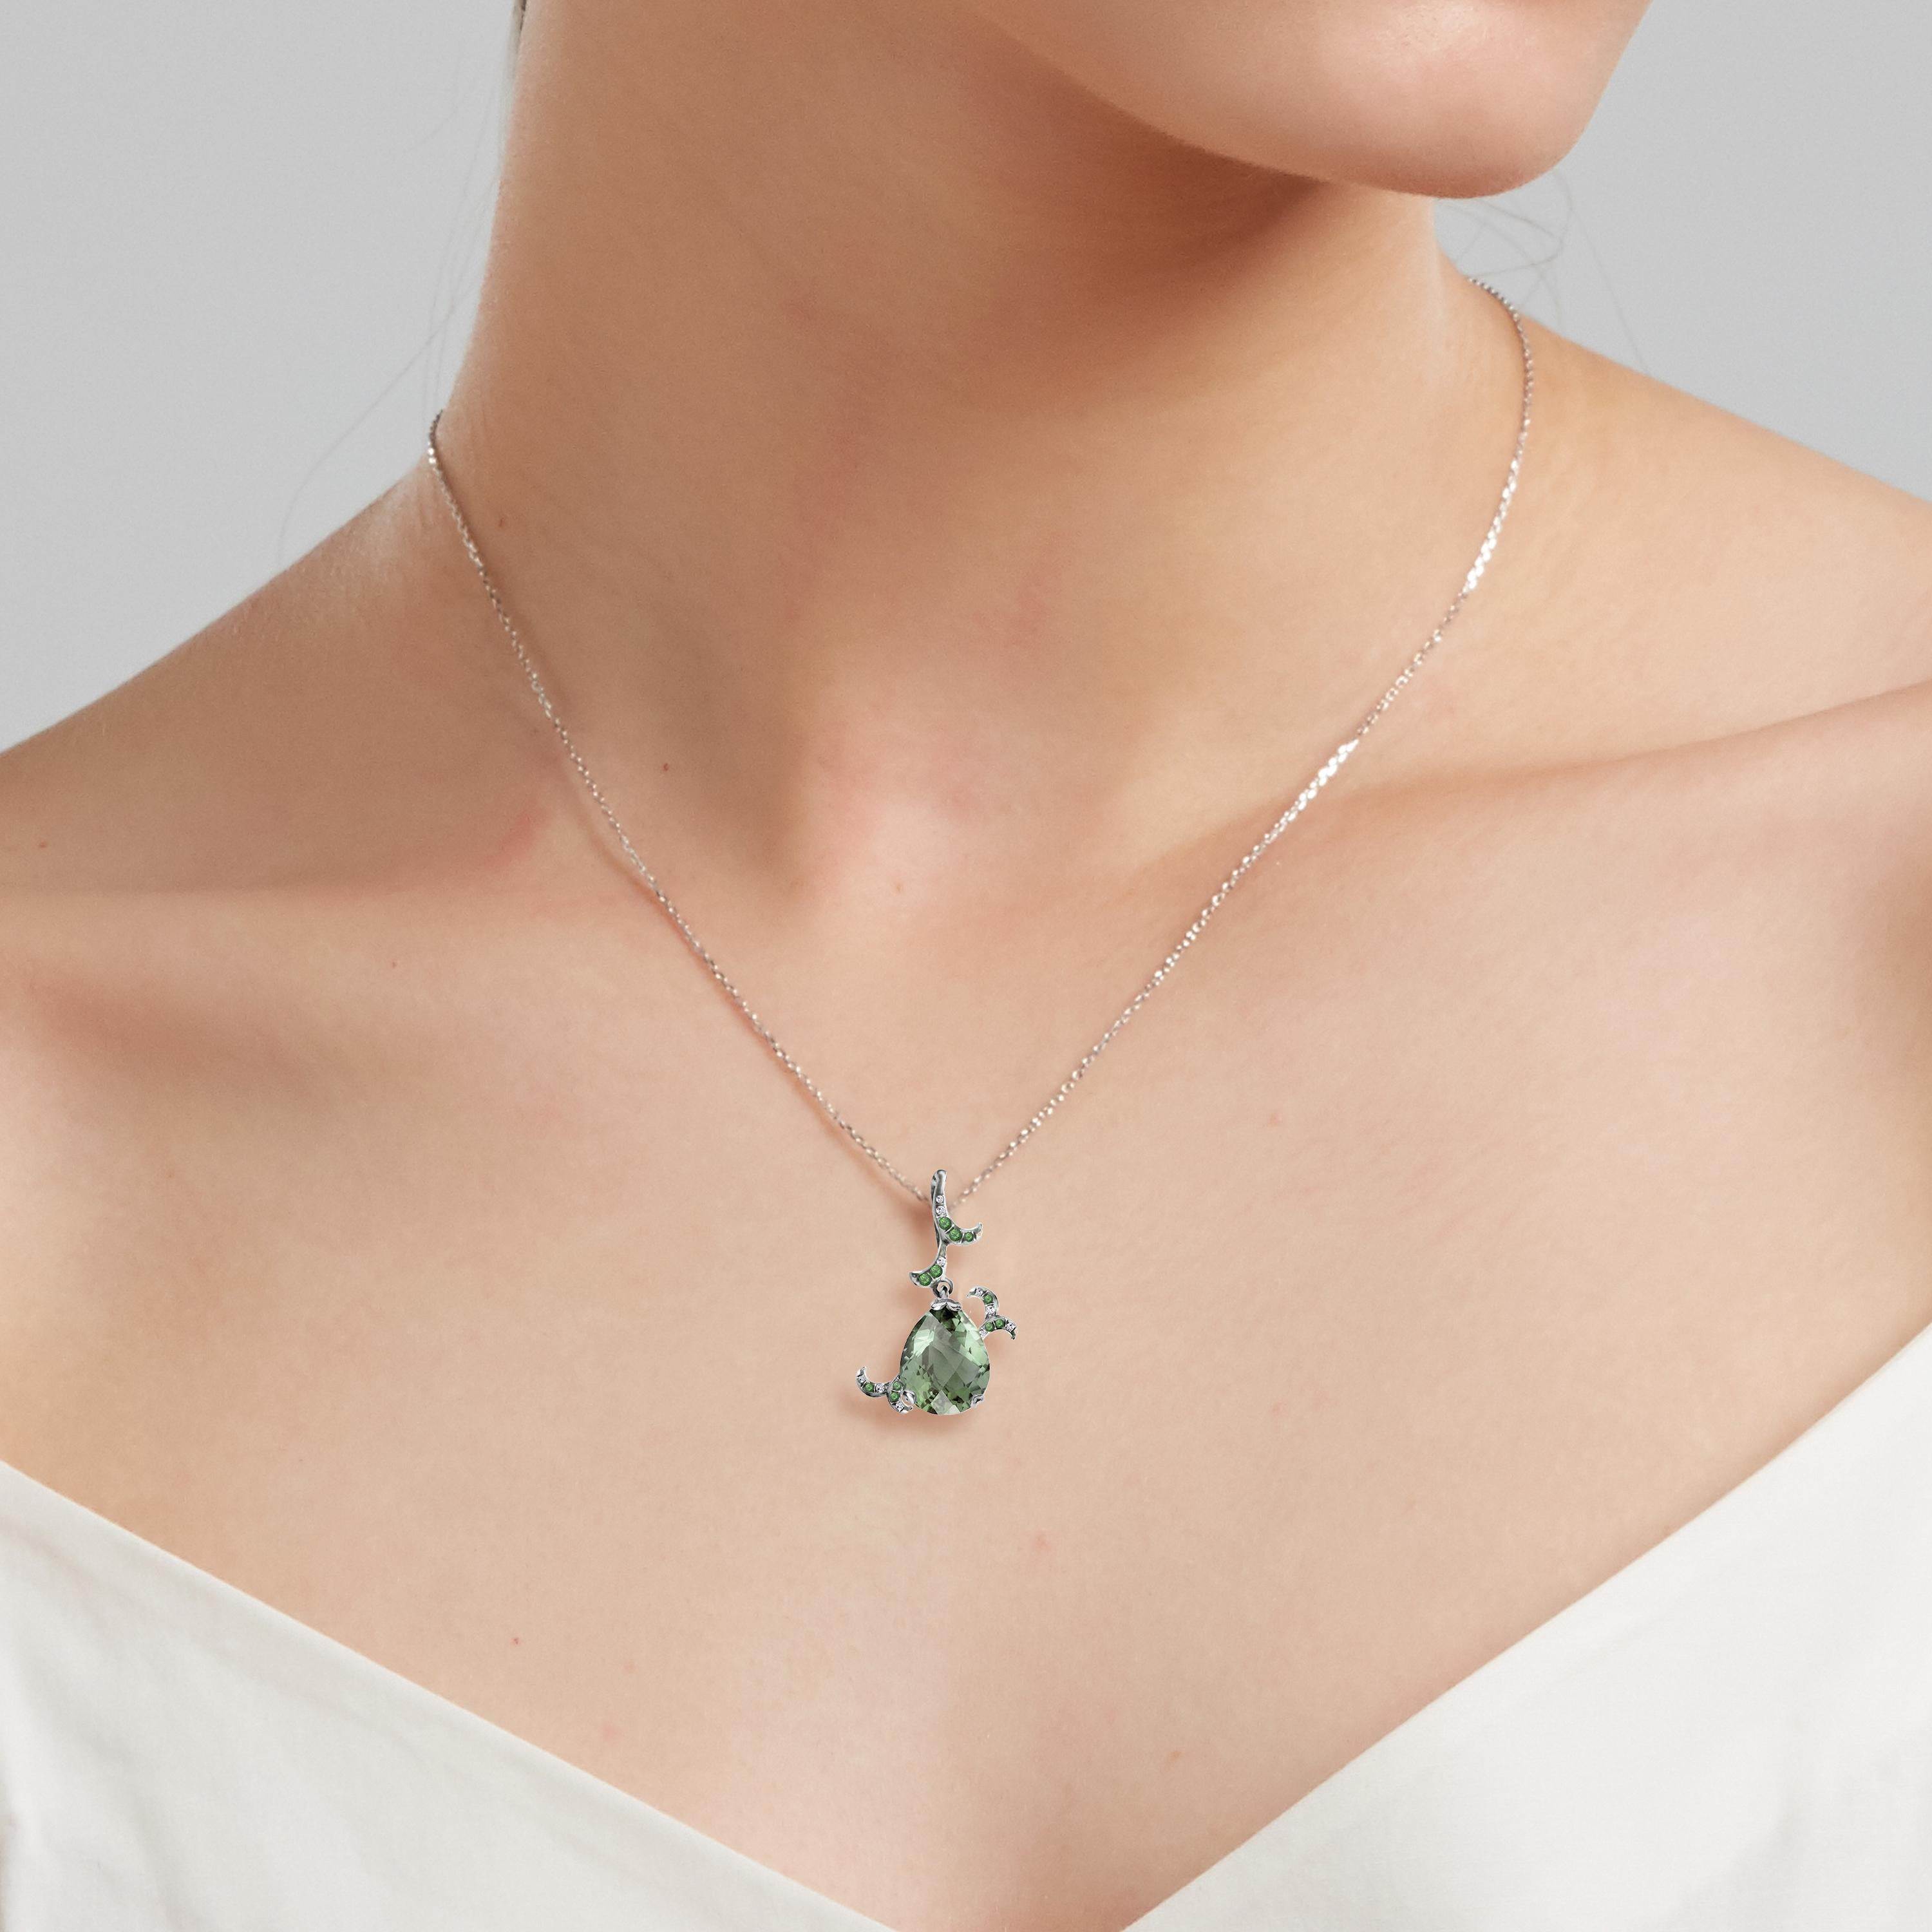 Description:
Whispering short pendant with curl detail featuring a 4.5ct green amethyst, 0.05ct diamonds and 0.09ct green garnets. Set in high polish black rhodium on 18ct white gold. Chain is 16 inches.

Inspiration:
Emulating femininity and